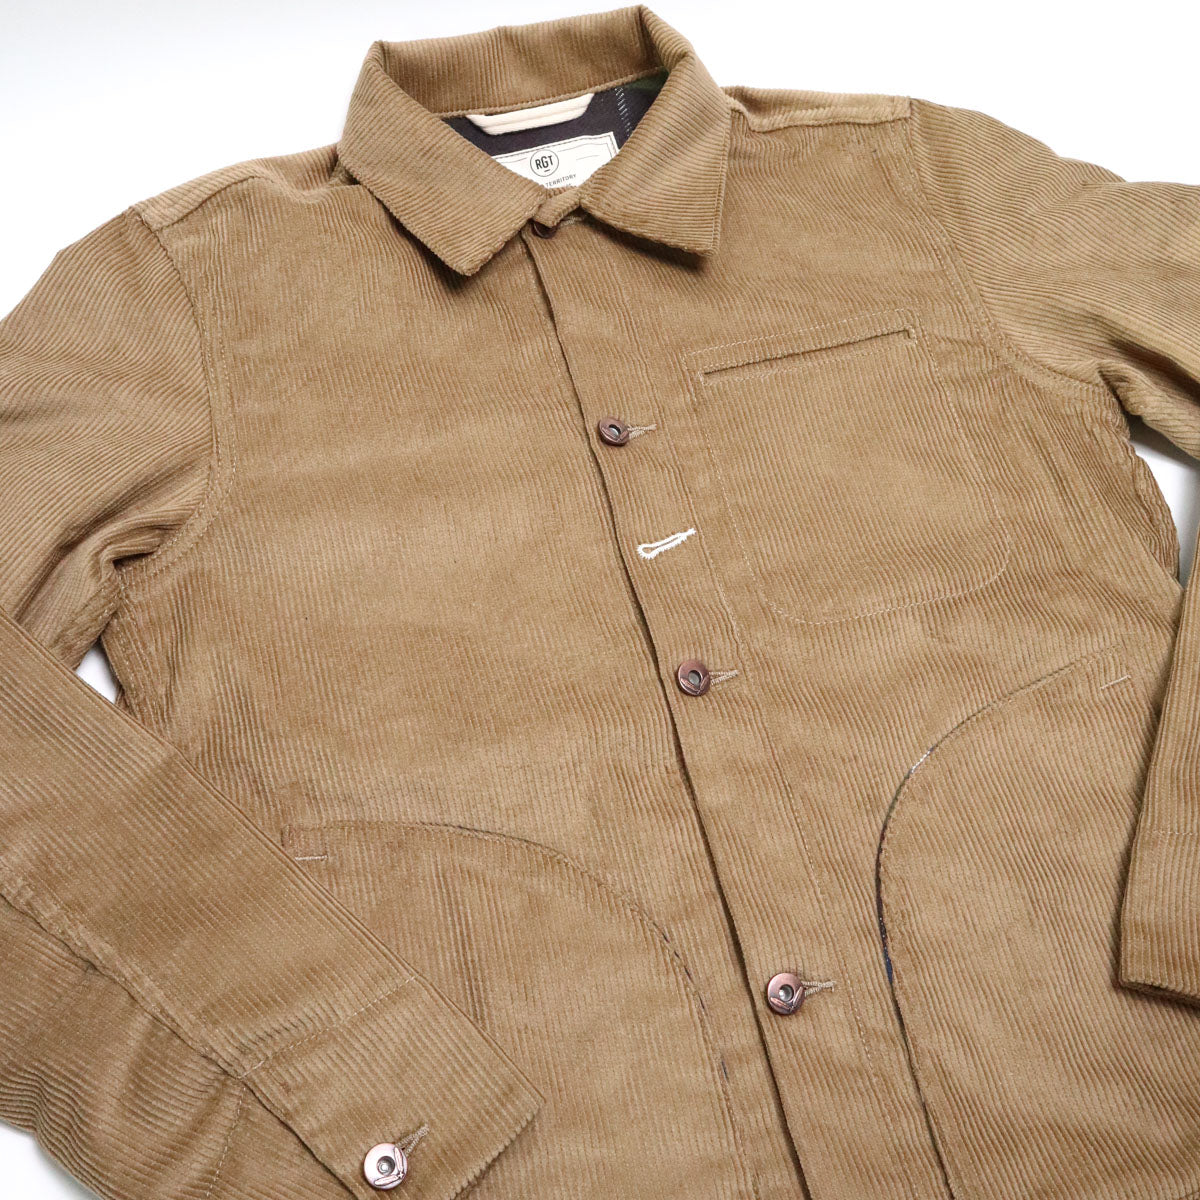 Tan Corduroy Lined Supply Jacket